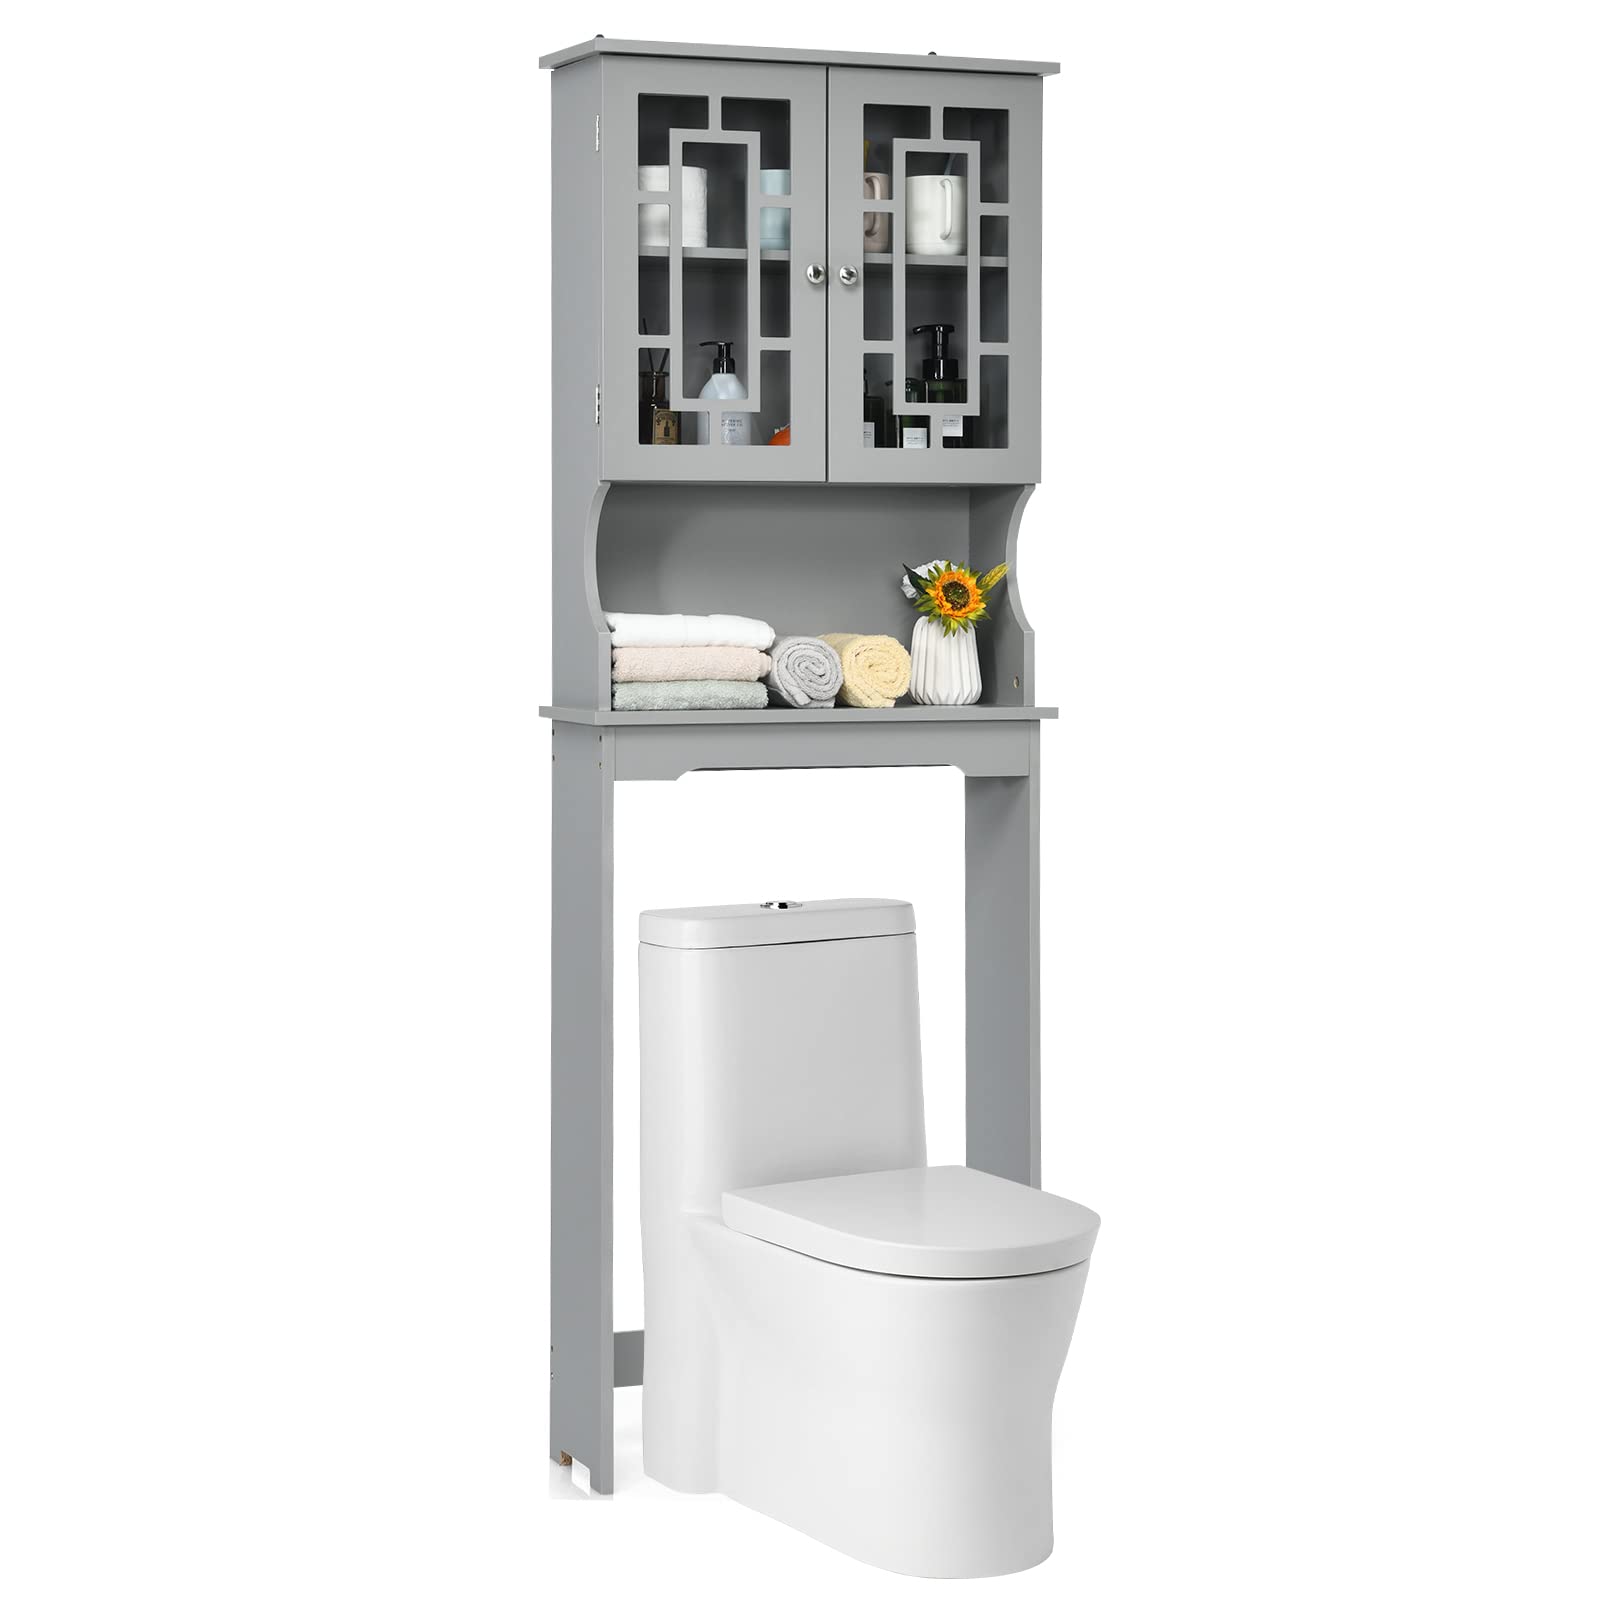 Giantex Over-The-Toilet Storage Spacesaver, Bathroom Organizer with Cabinet and Shelf